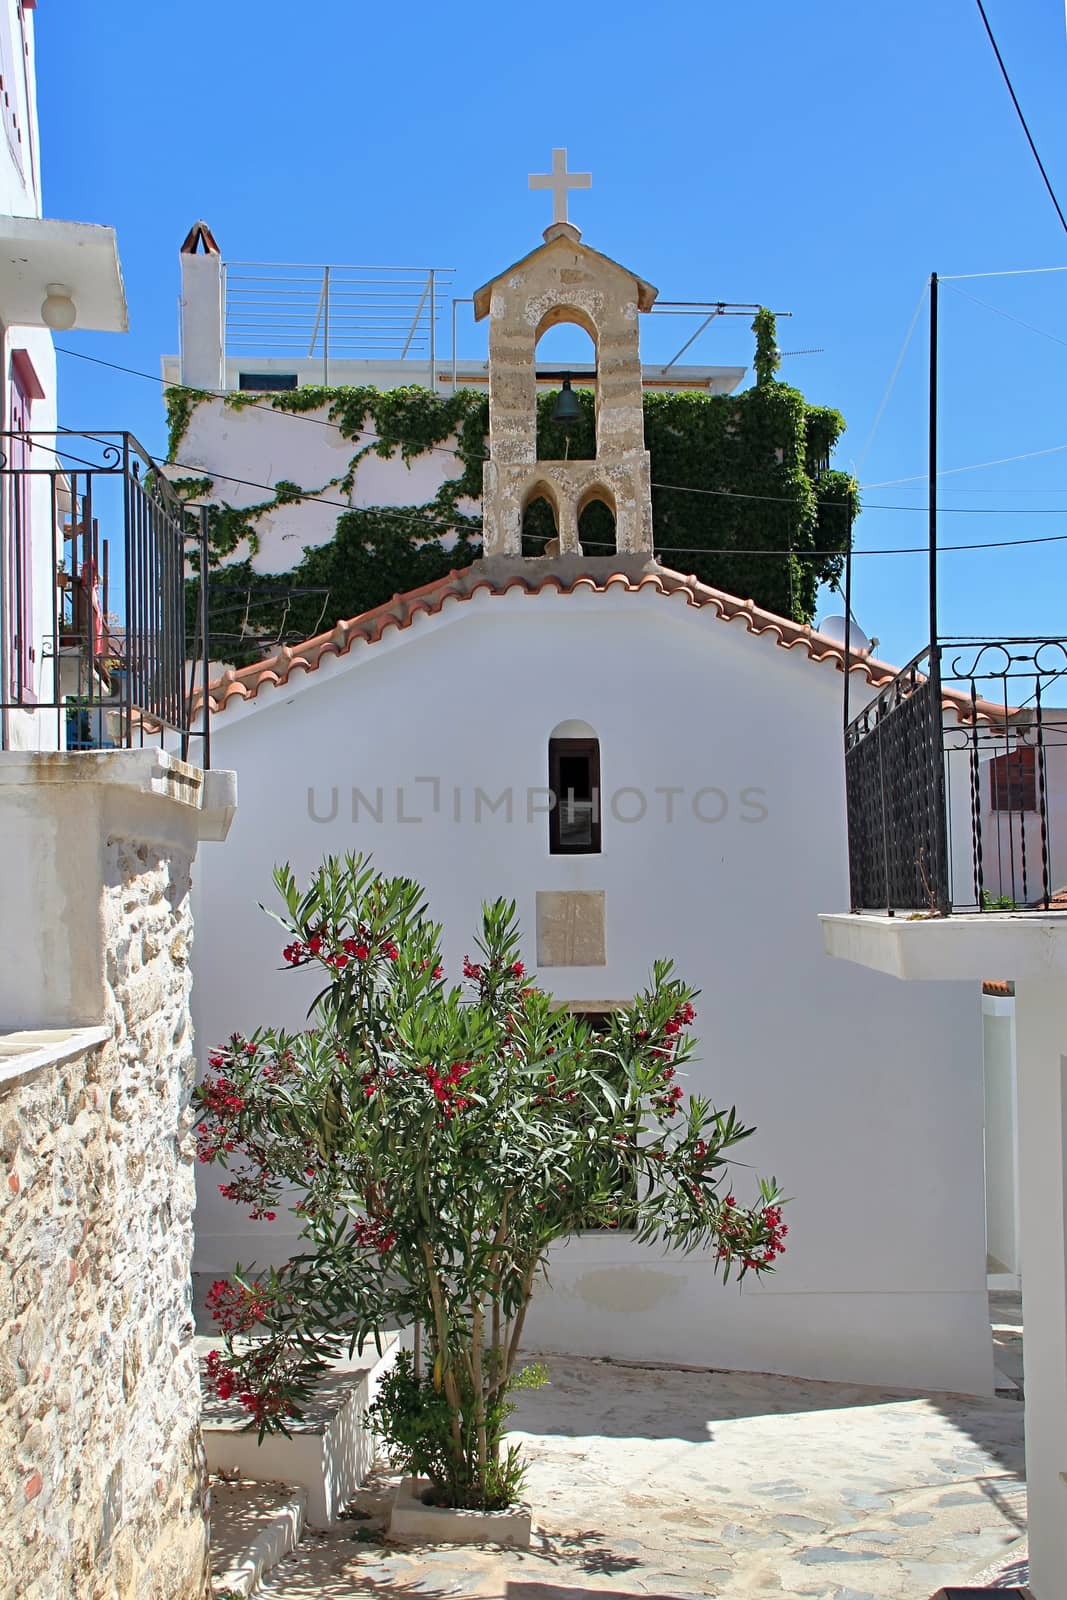 Photo shows Greek old village houses and their surroundings.